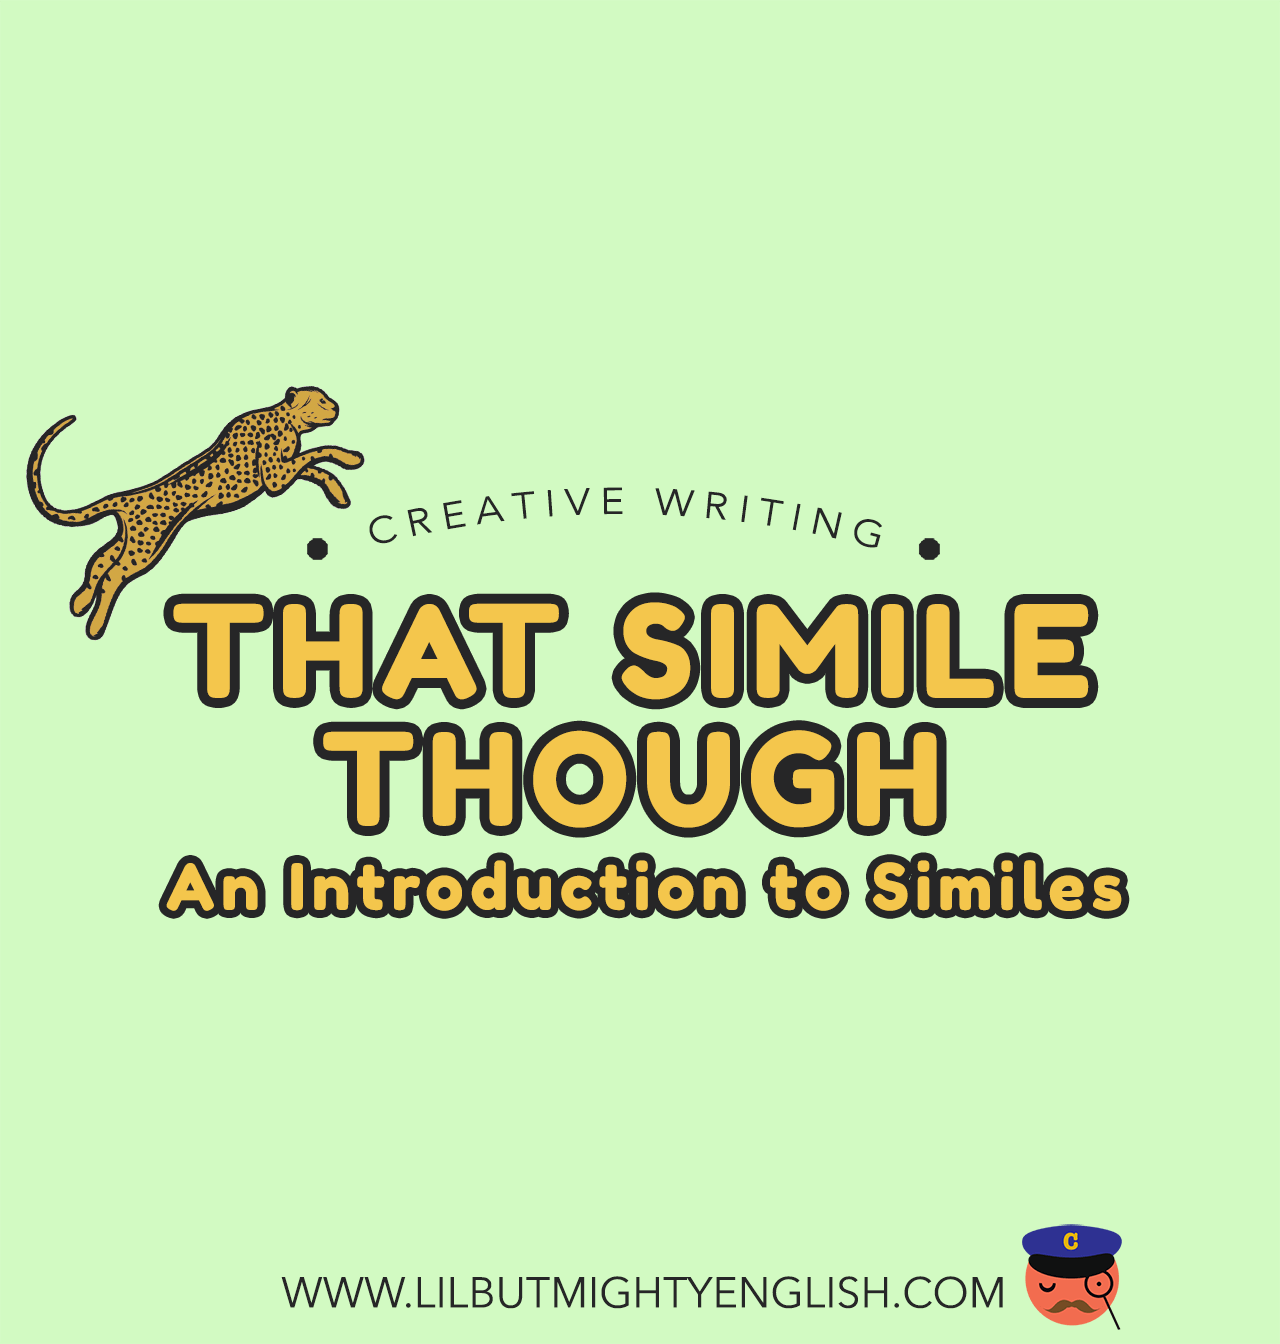 That Simile Though | An Introduction to Similes